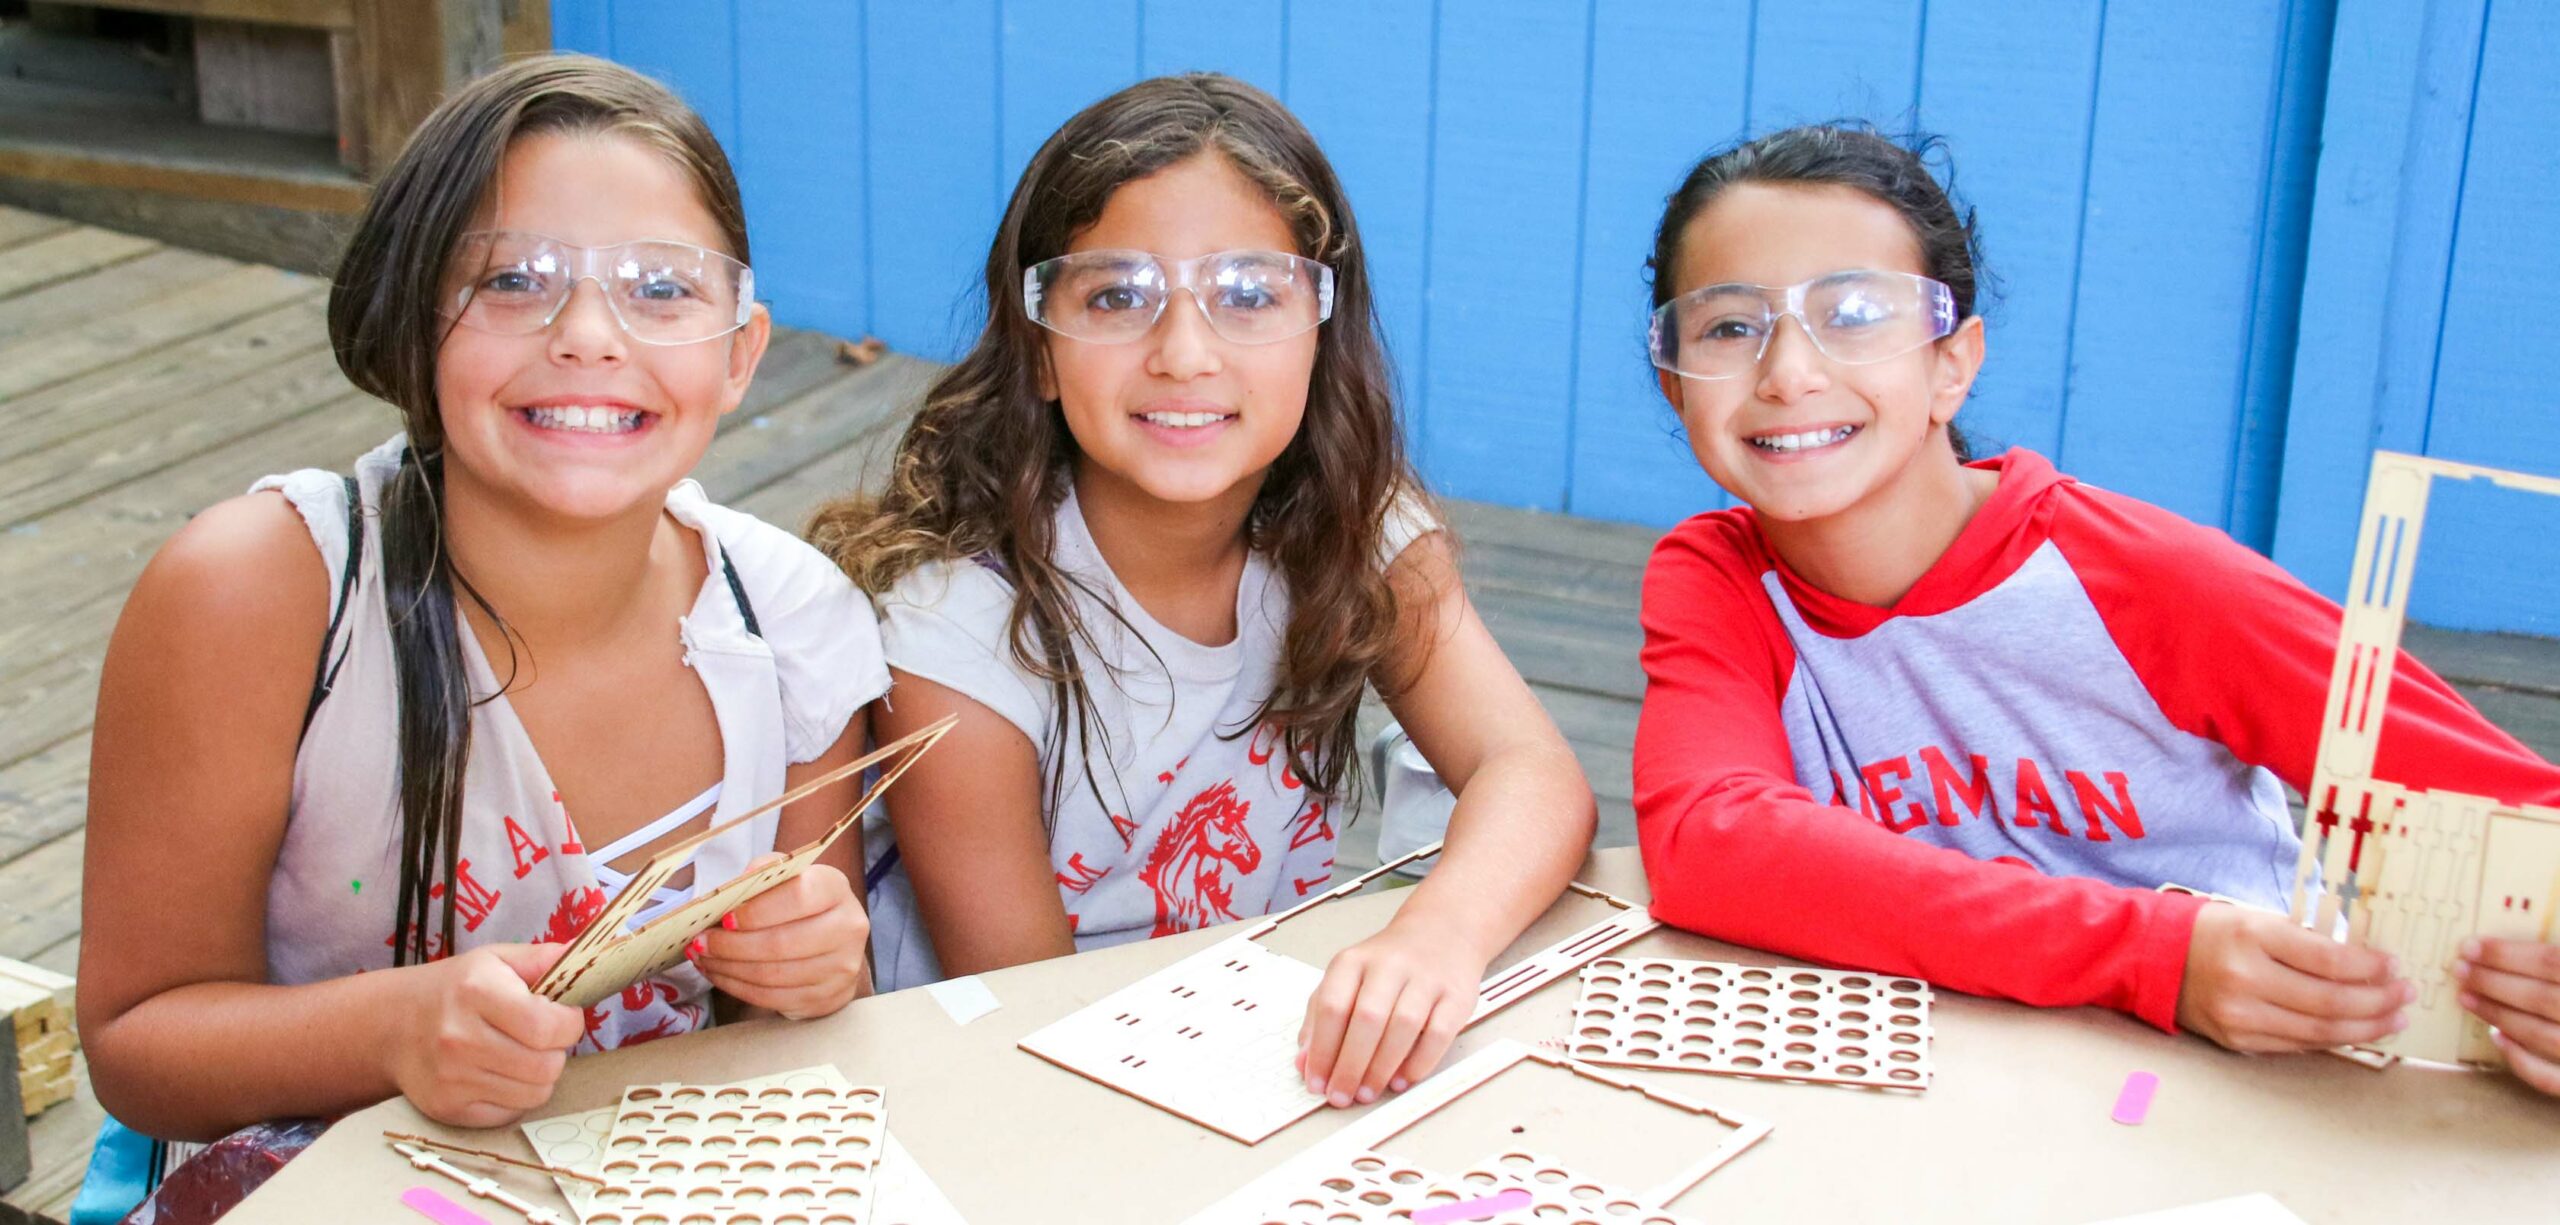 Three girl campers working on a STEM project